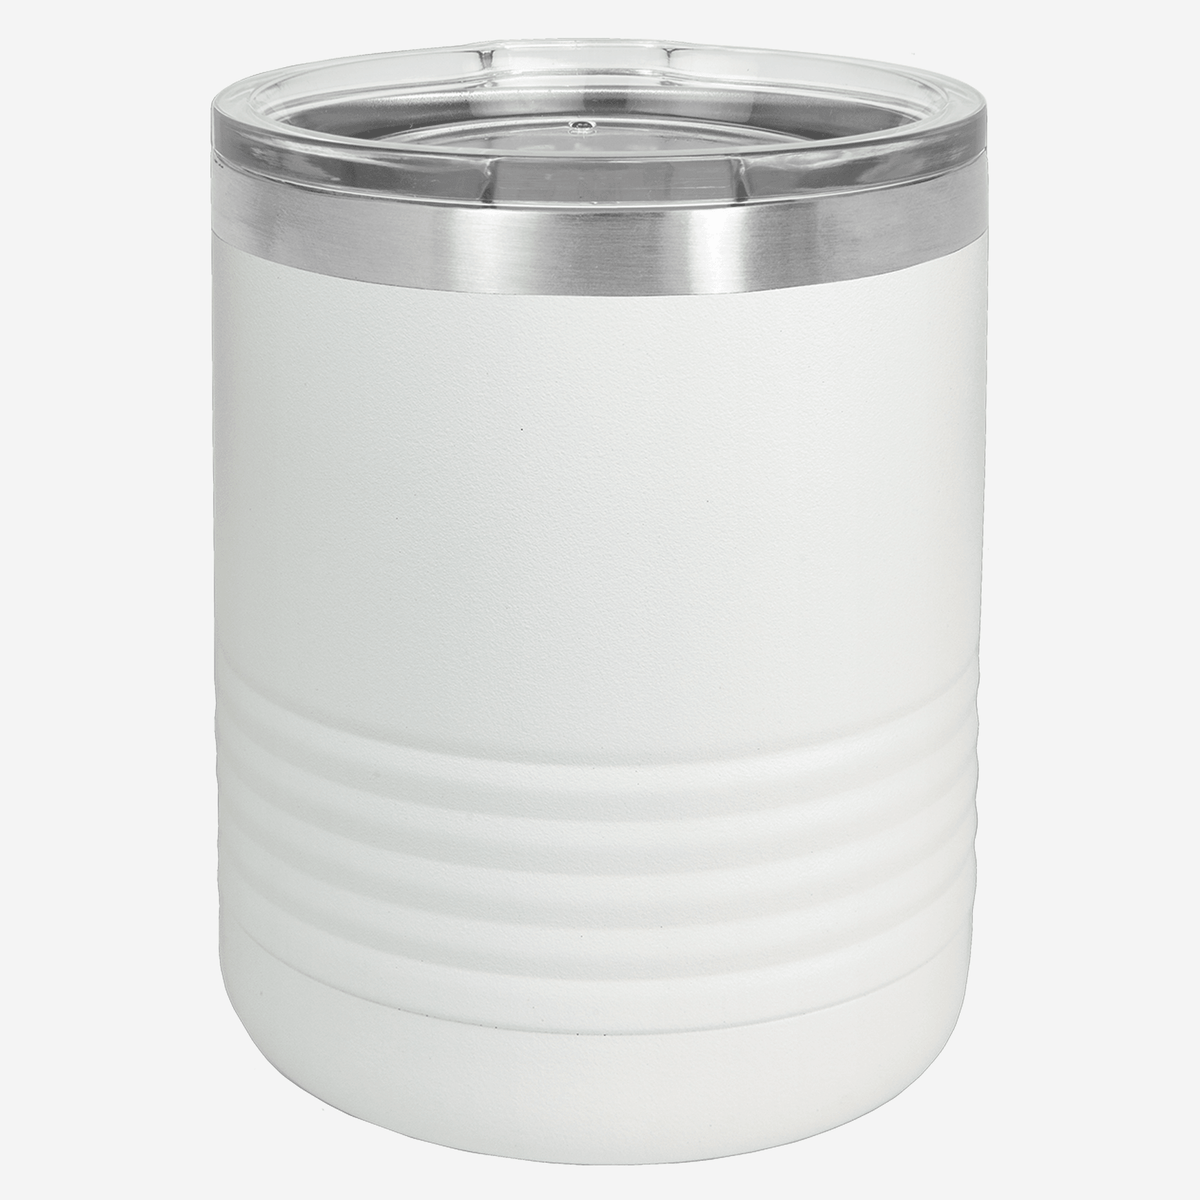 10 oz white tumbler with lid grip rings on the bottom